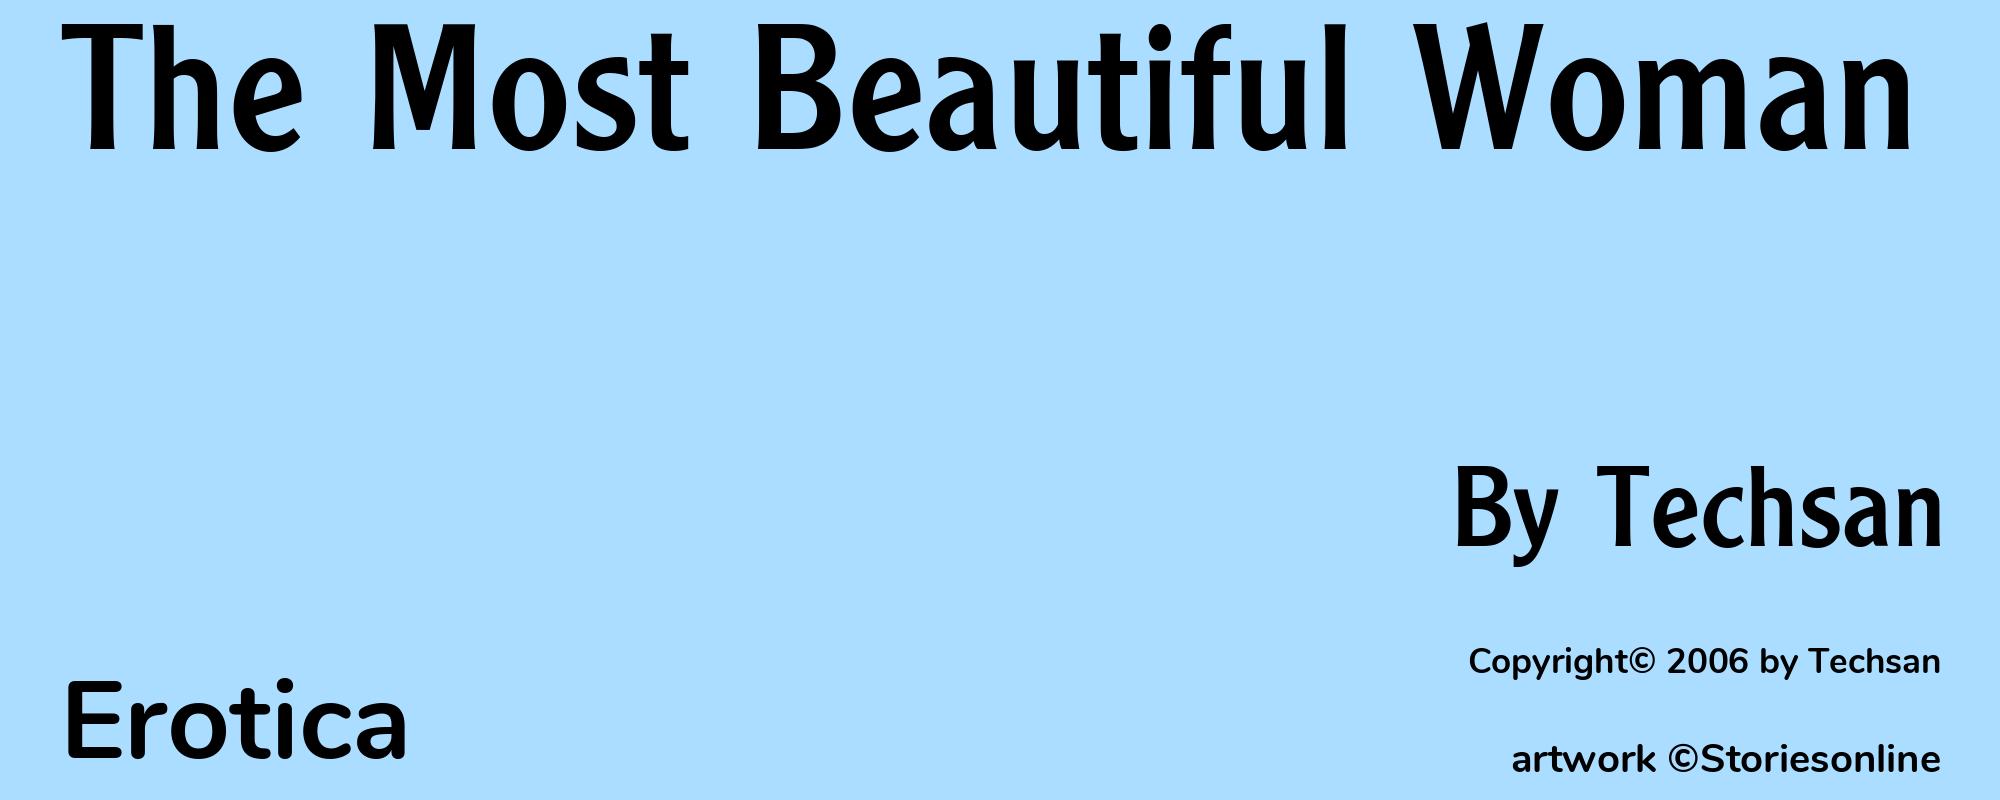 The Most Beautiful Woman - Cover